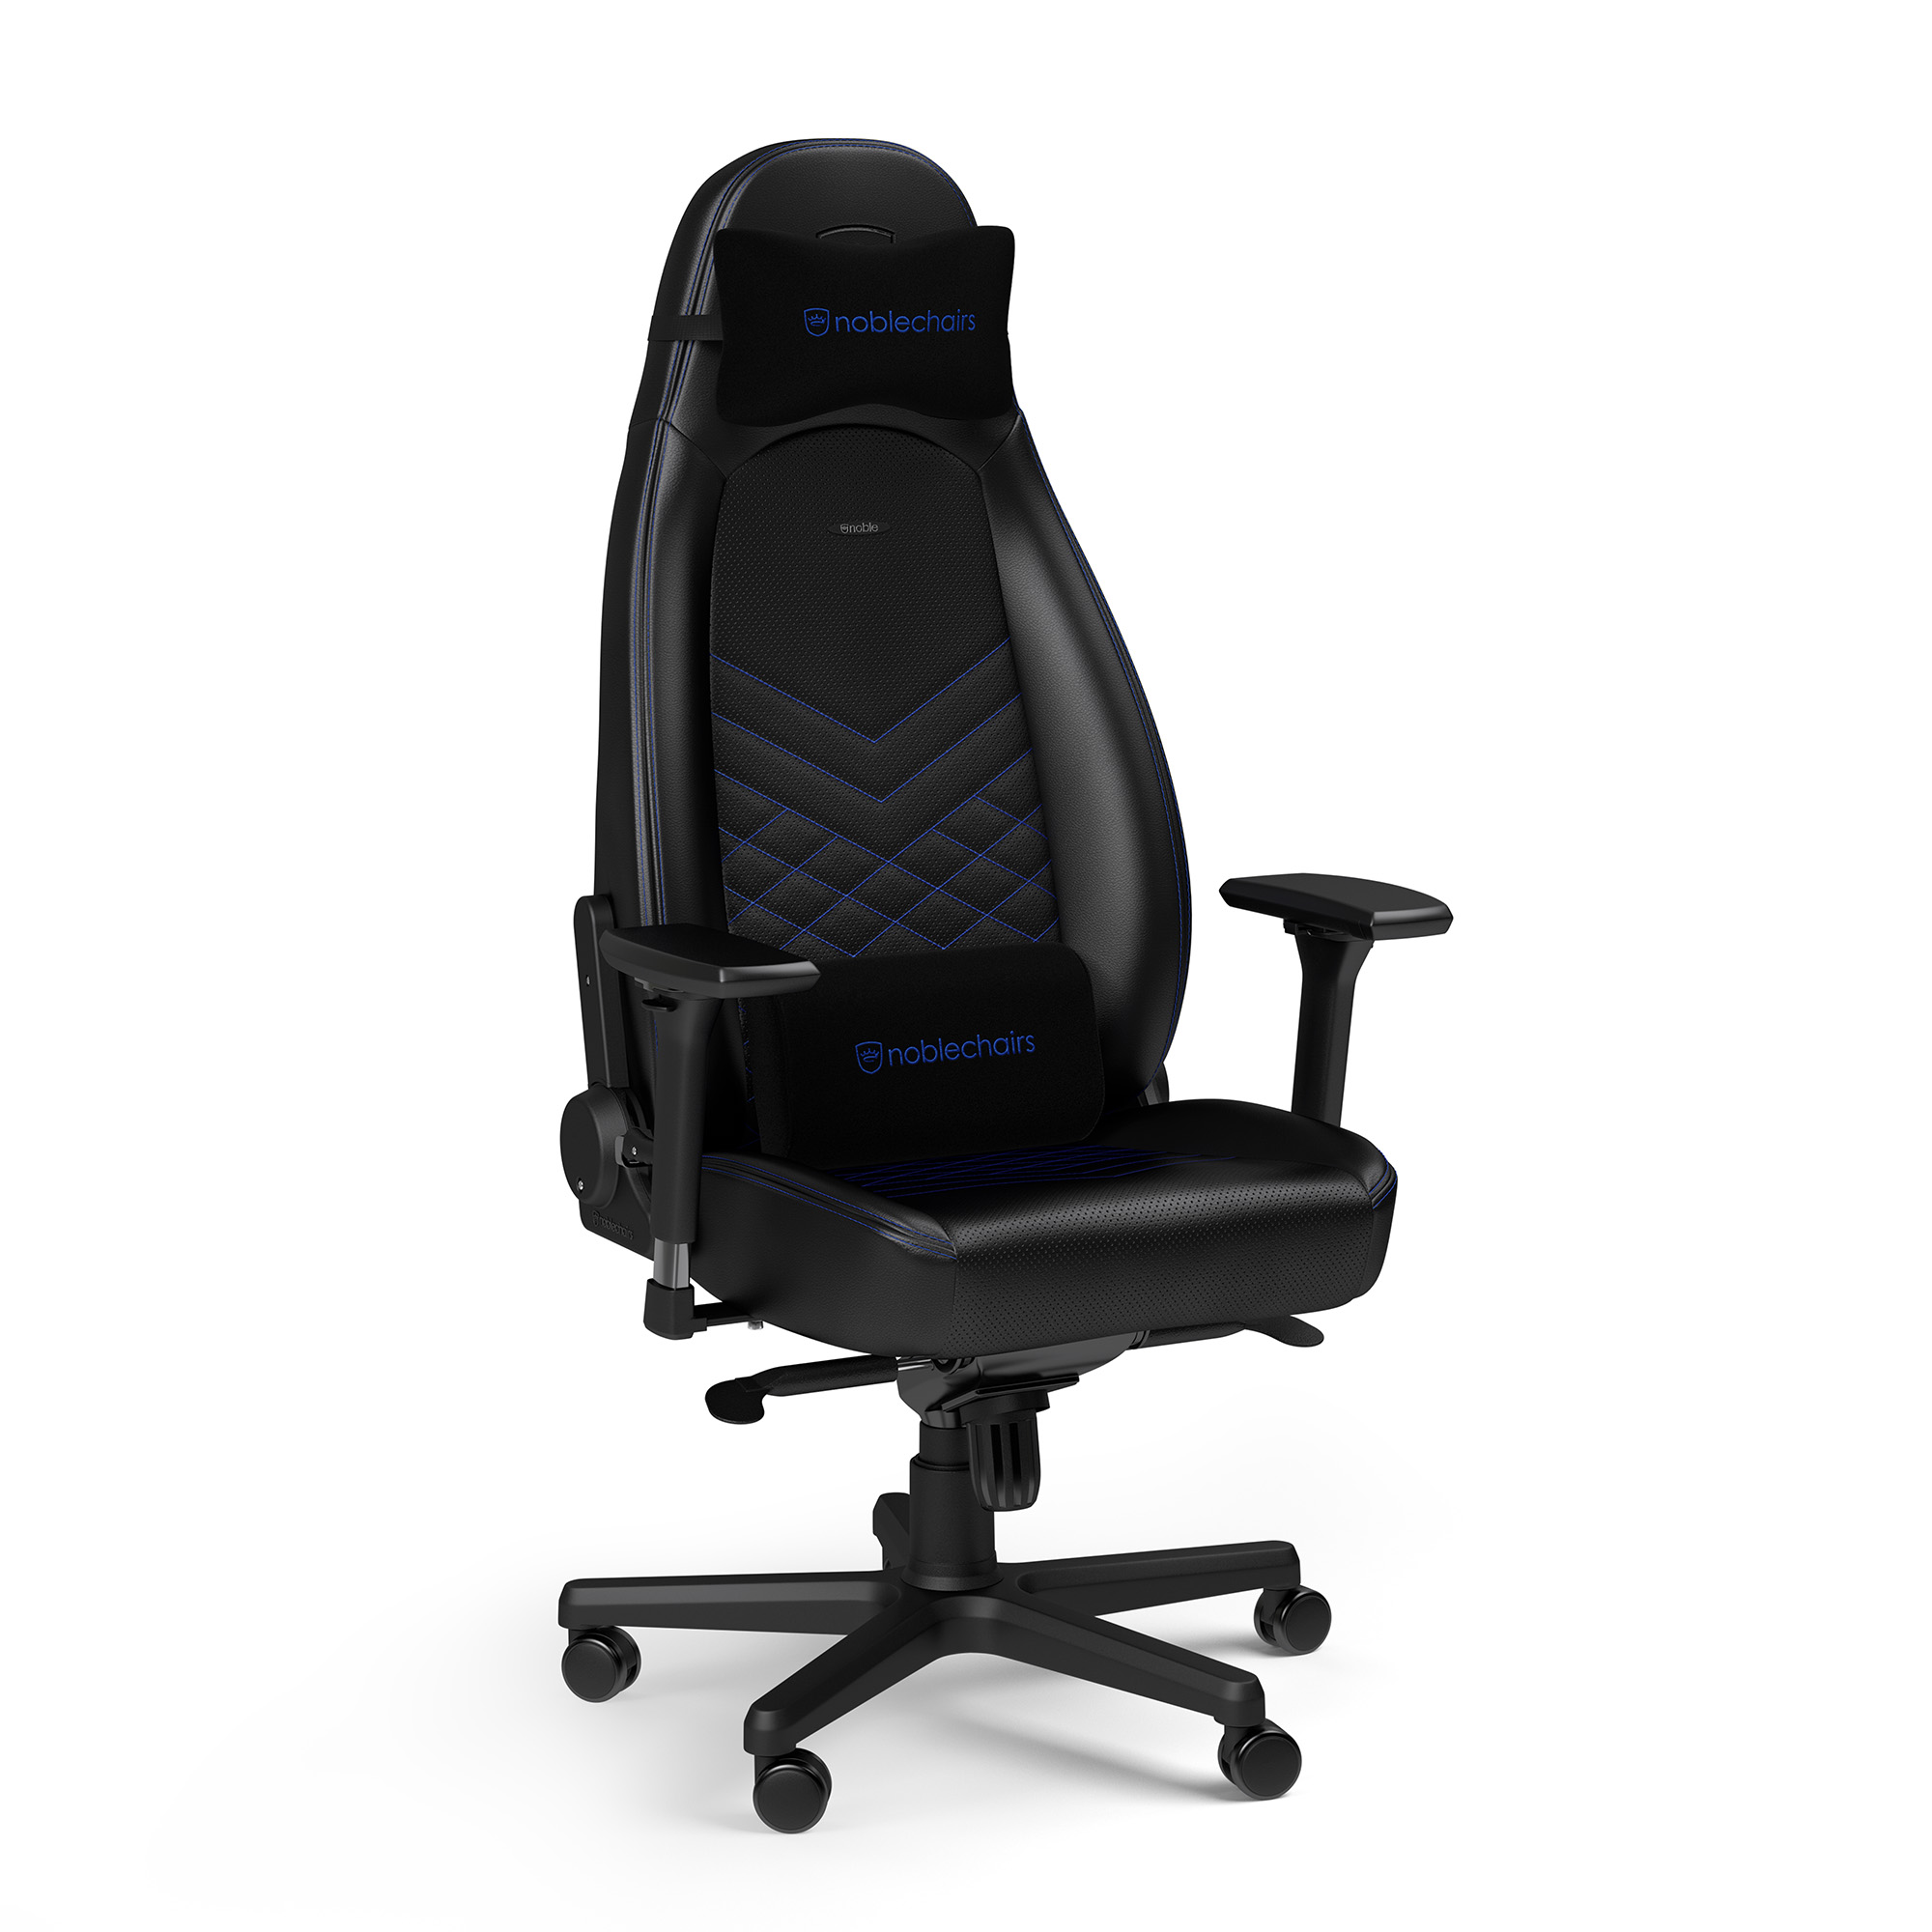 noblechairs - noblechairs ICON Gaming Chair - Black/Blue